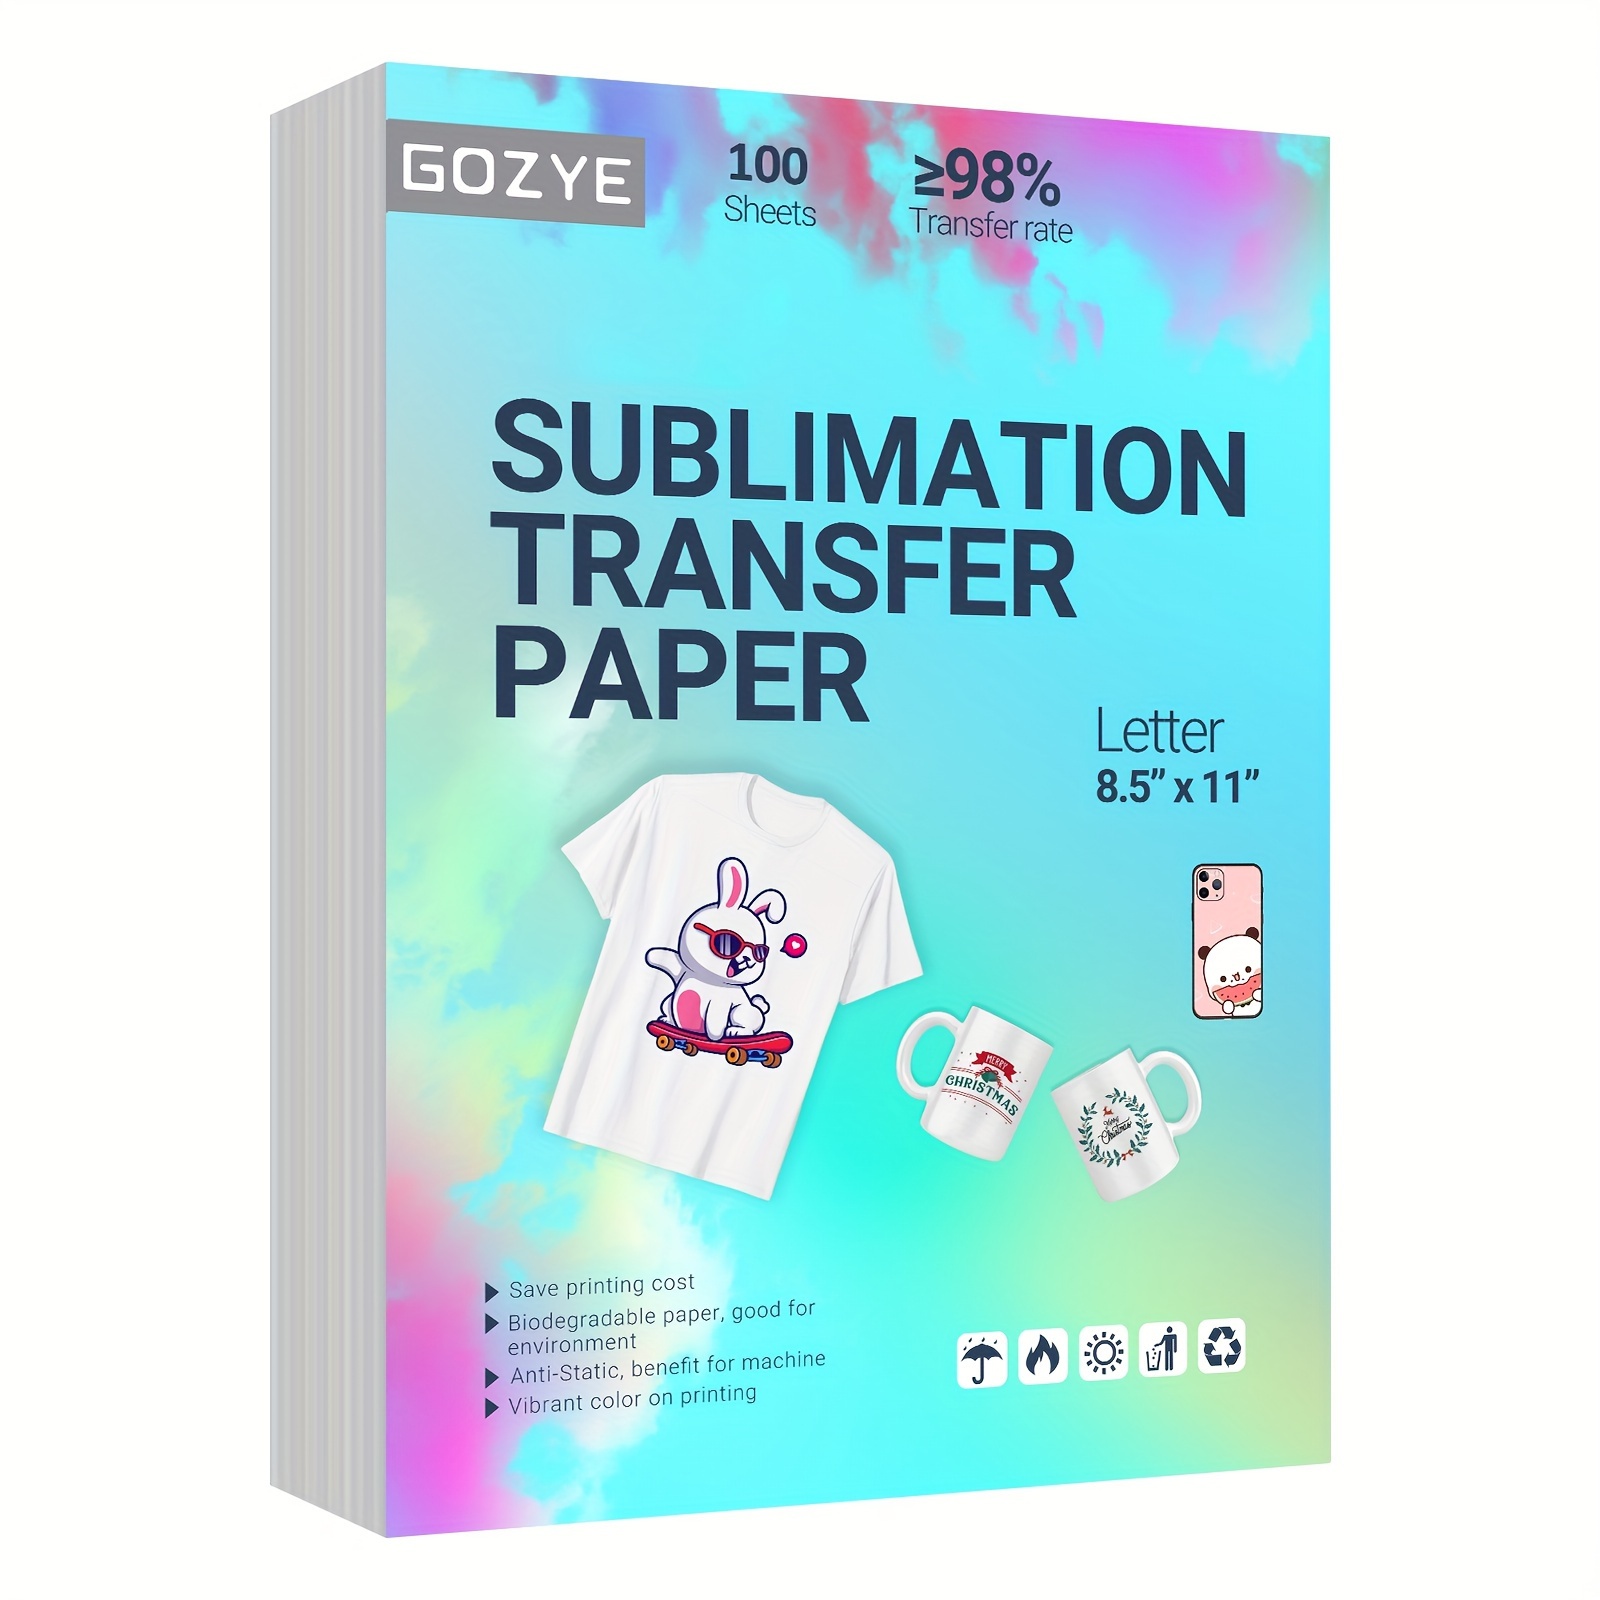 8.5x11 High Quality Sublimation Paper 